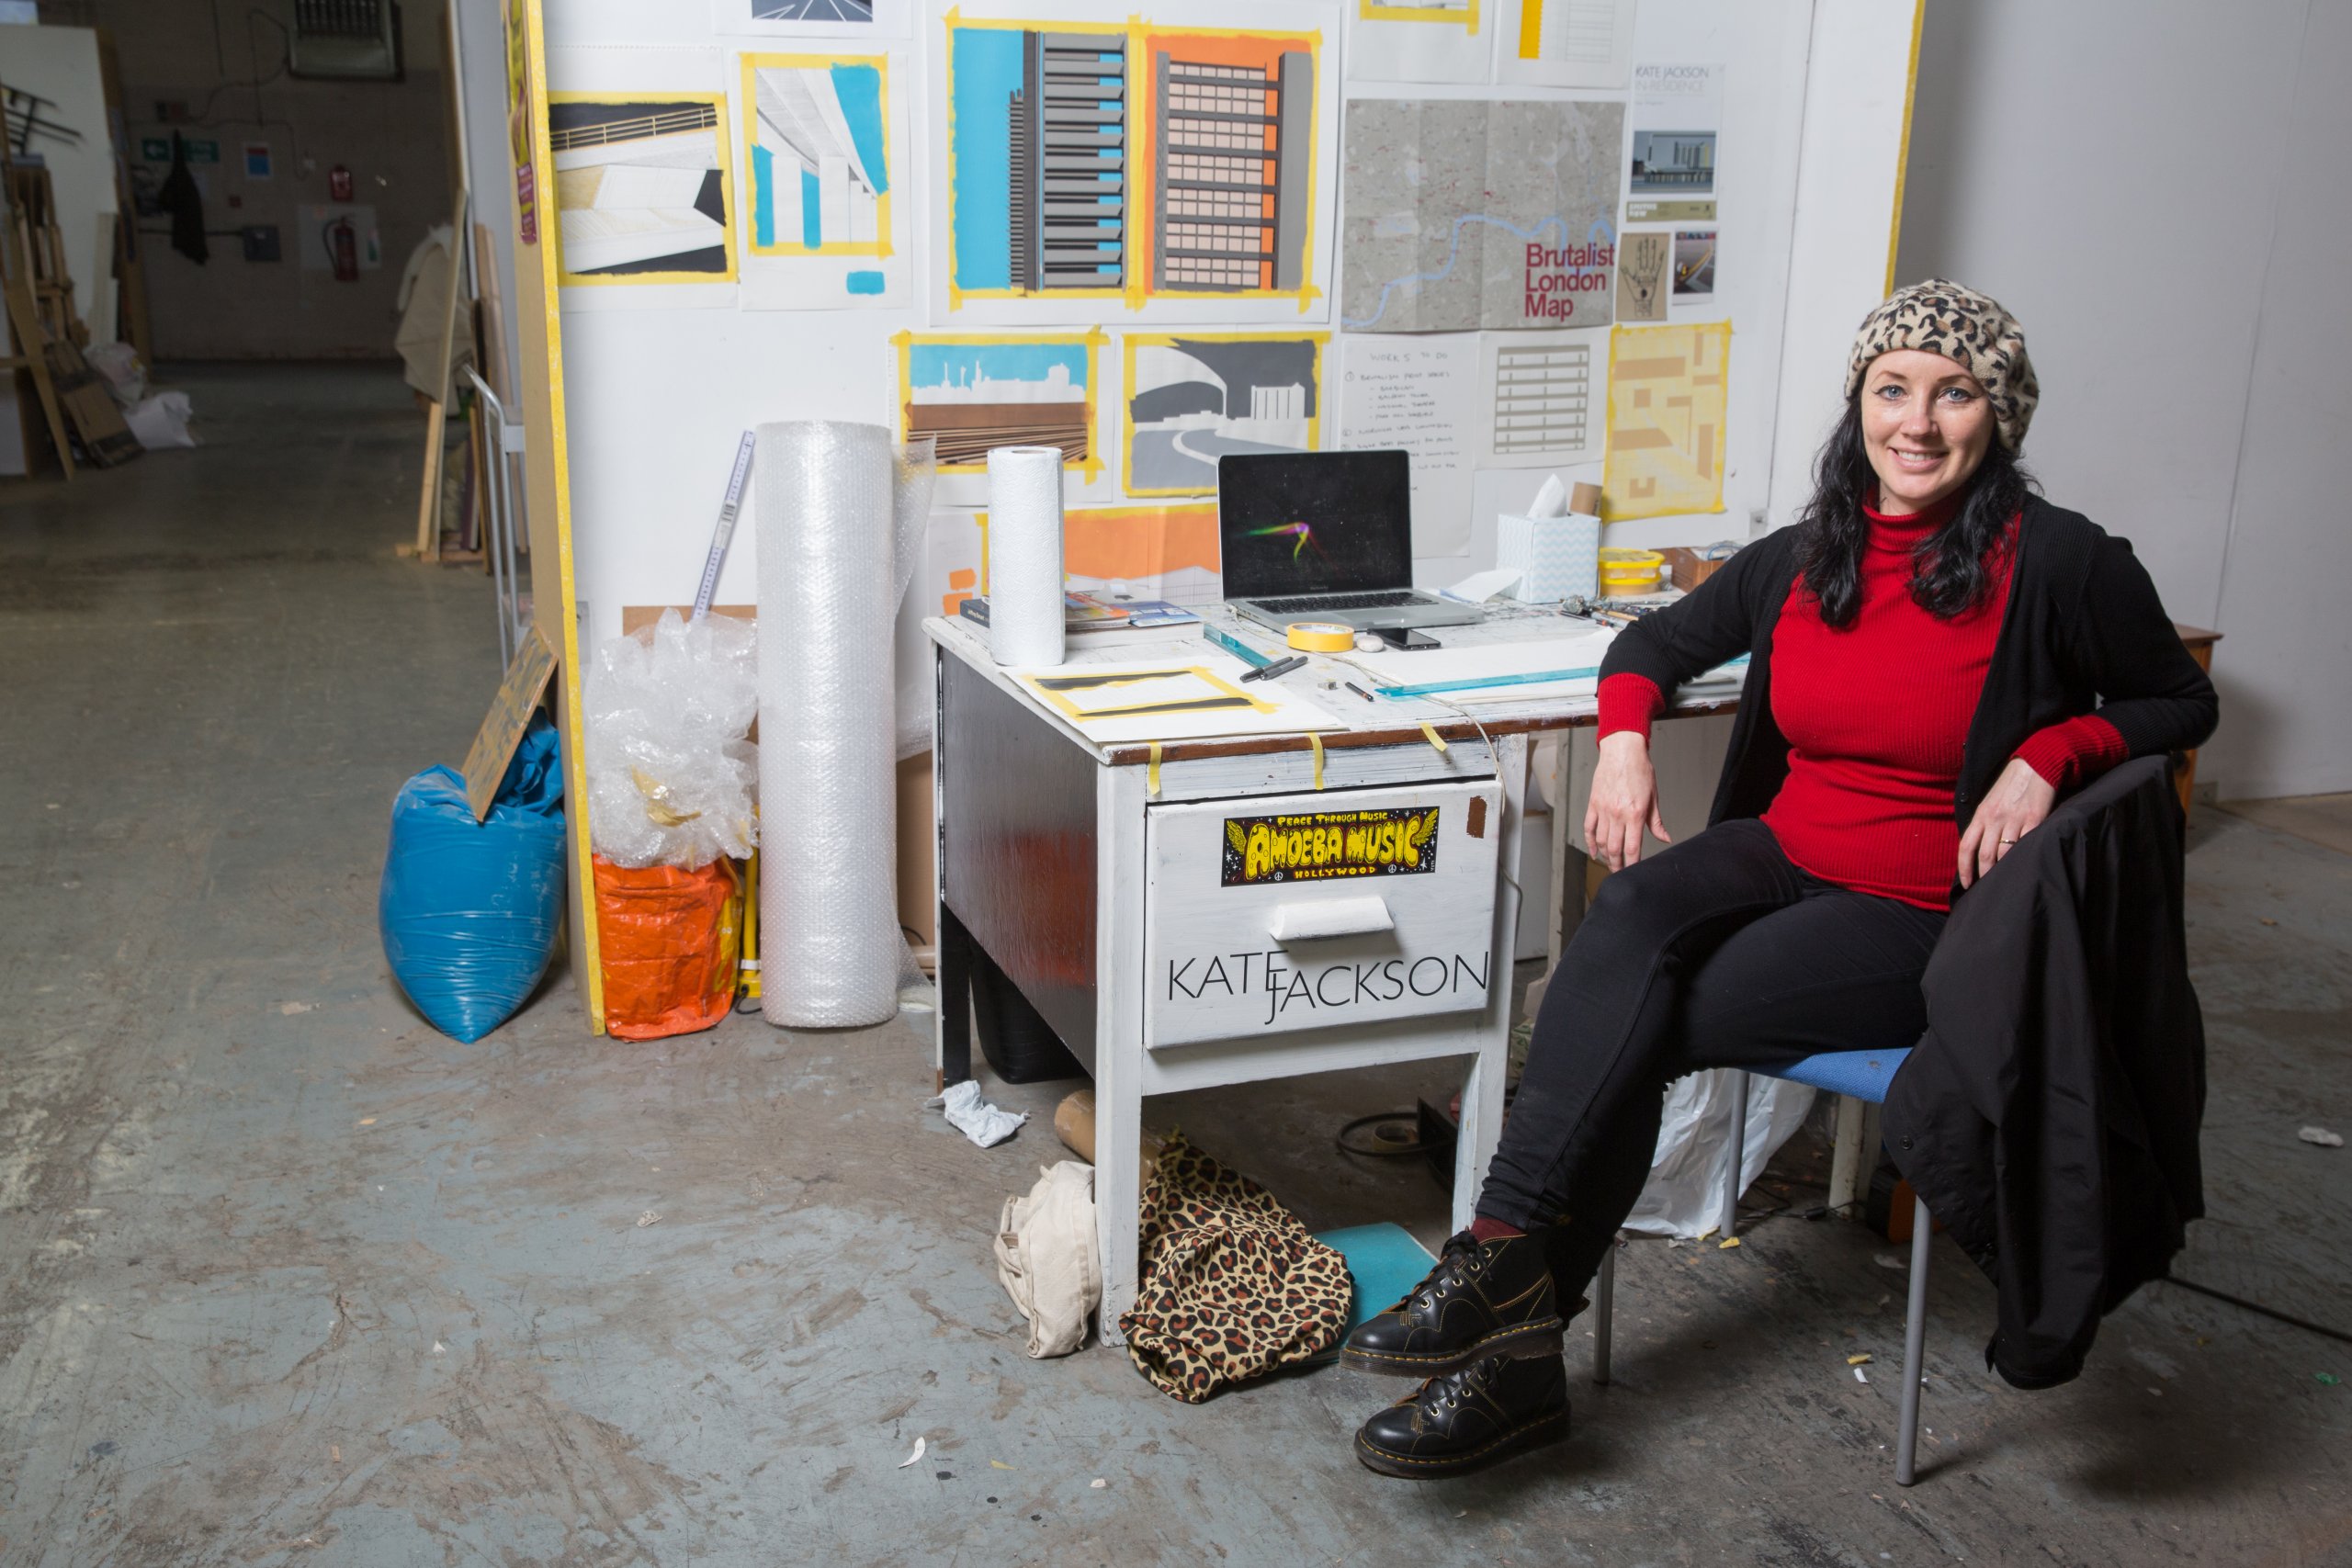 two_queens_artist_kate_jackson_in her_studio_space_image_by_dave_wilson_clarke